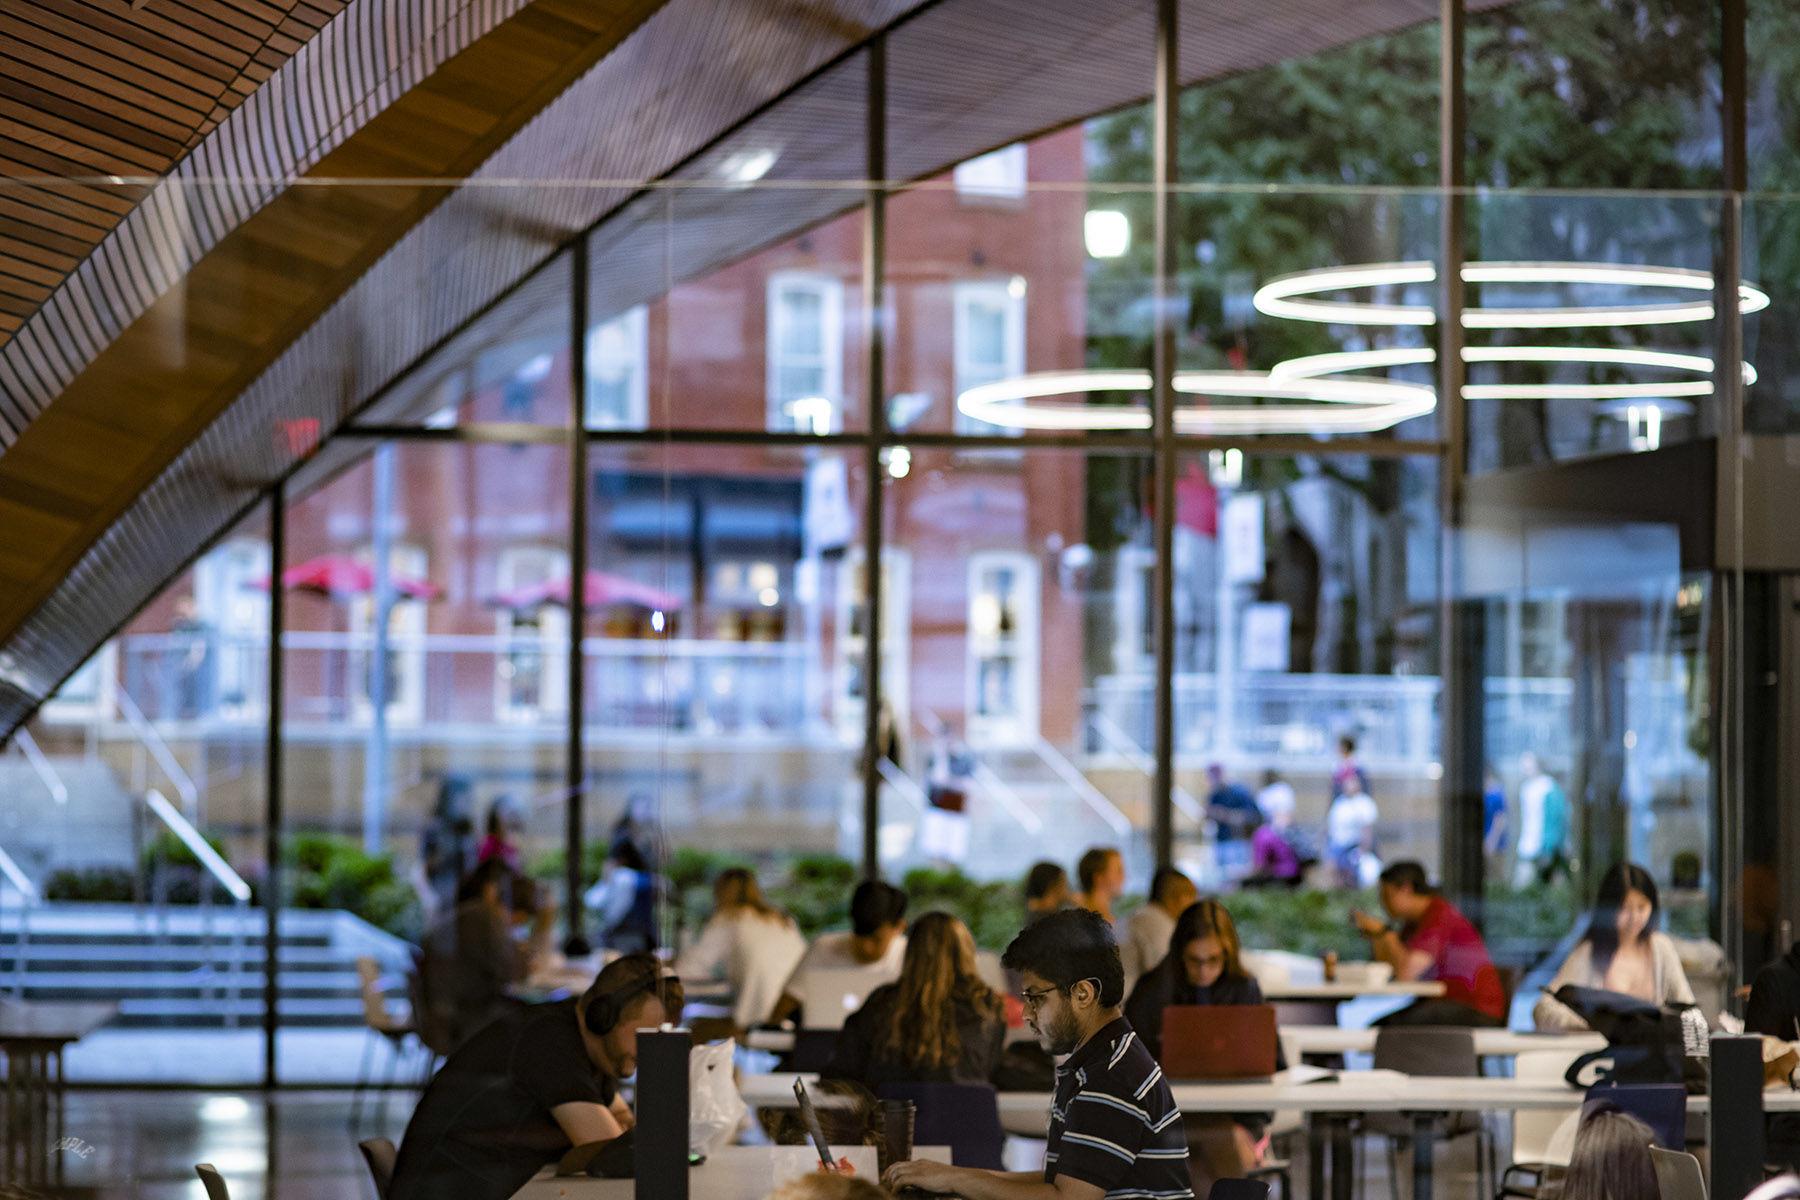 students studying in Charles Library with windows facing out to Liacouras Walk